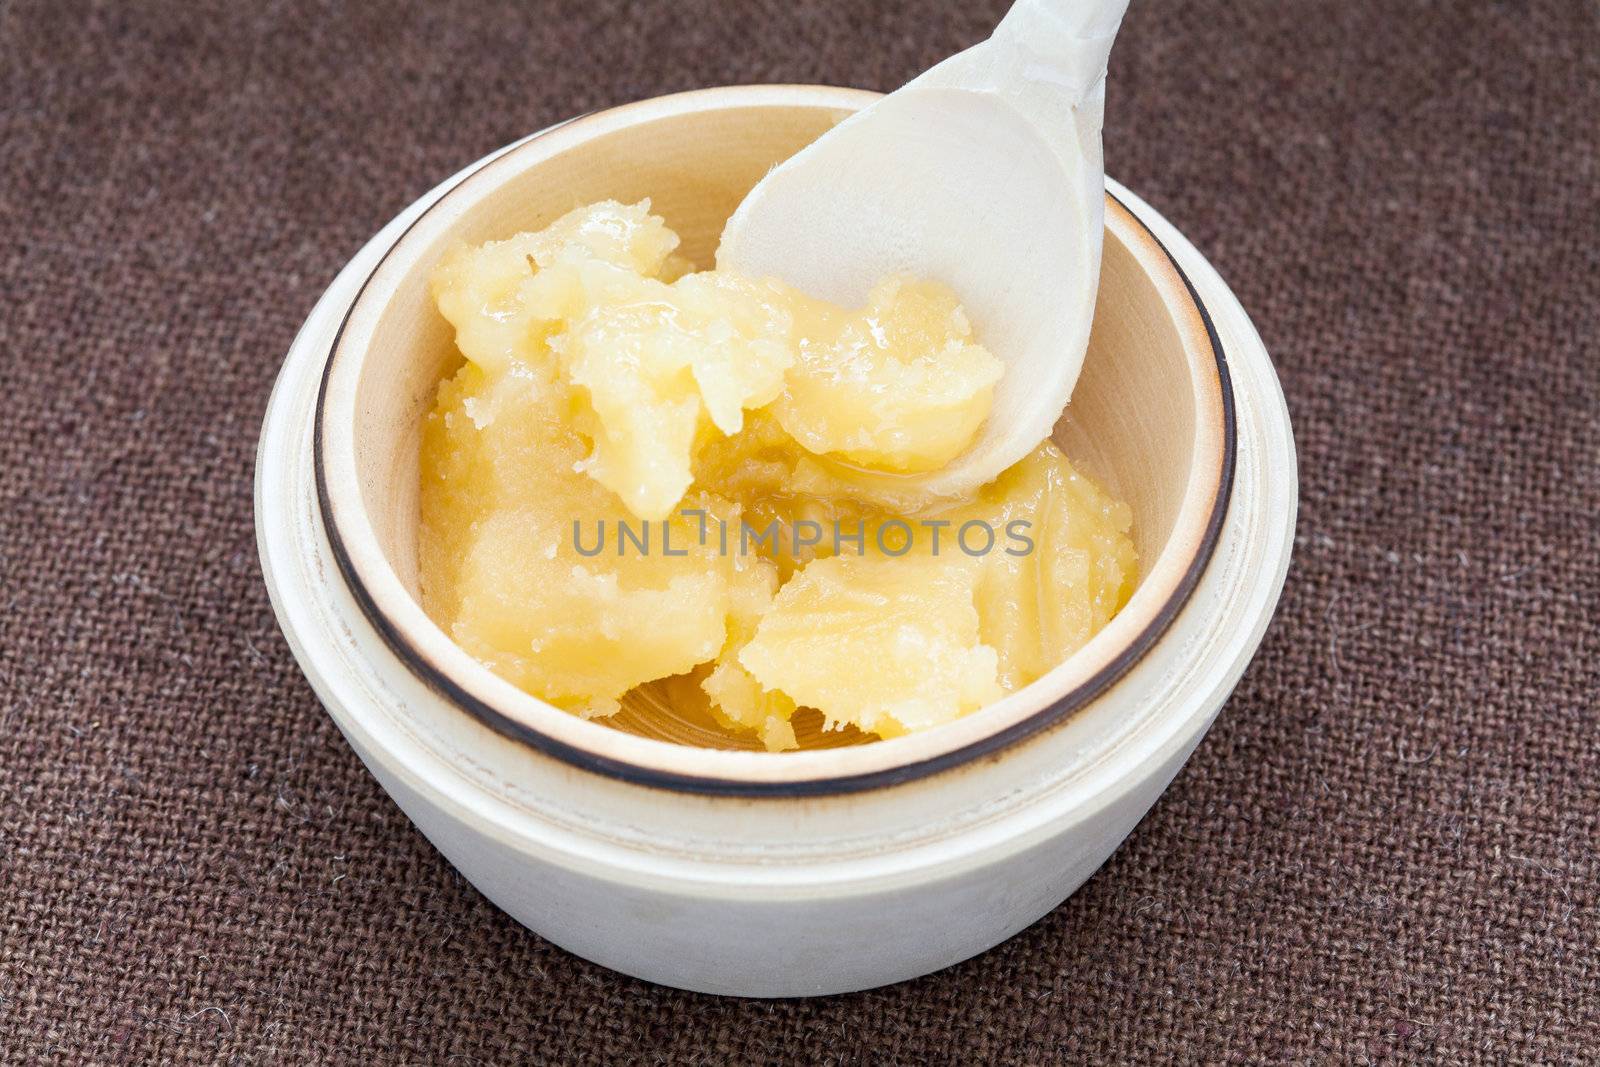 Pot of honey and wooden spoon on a bagging background